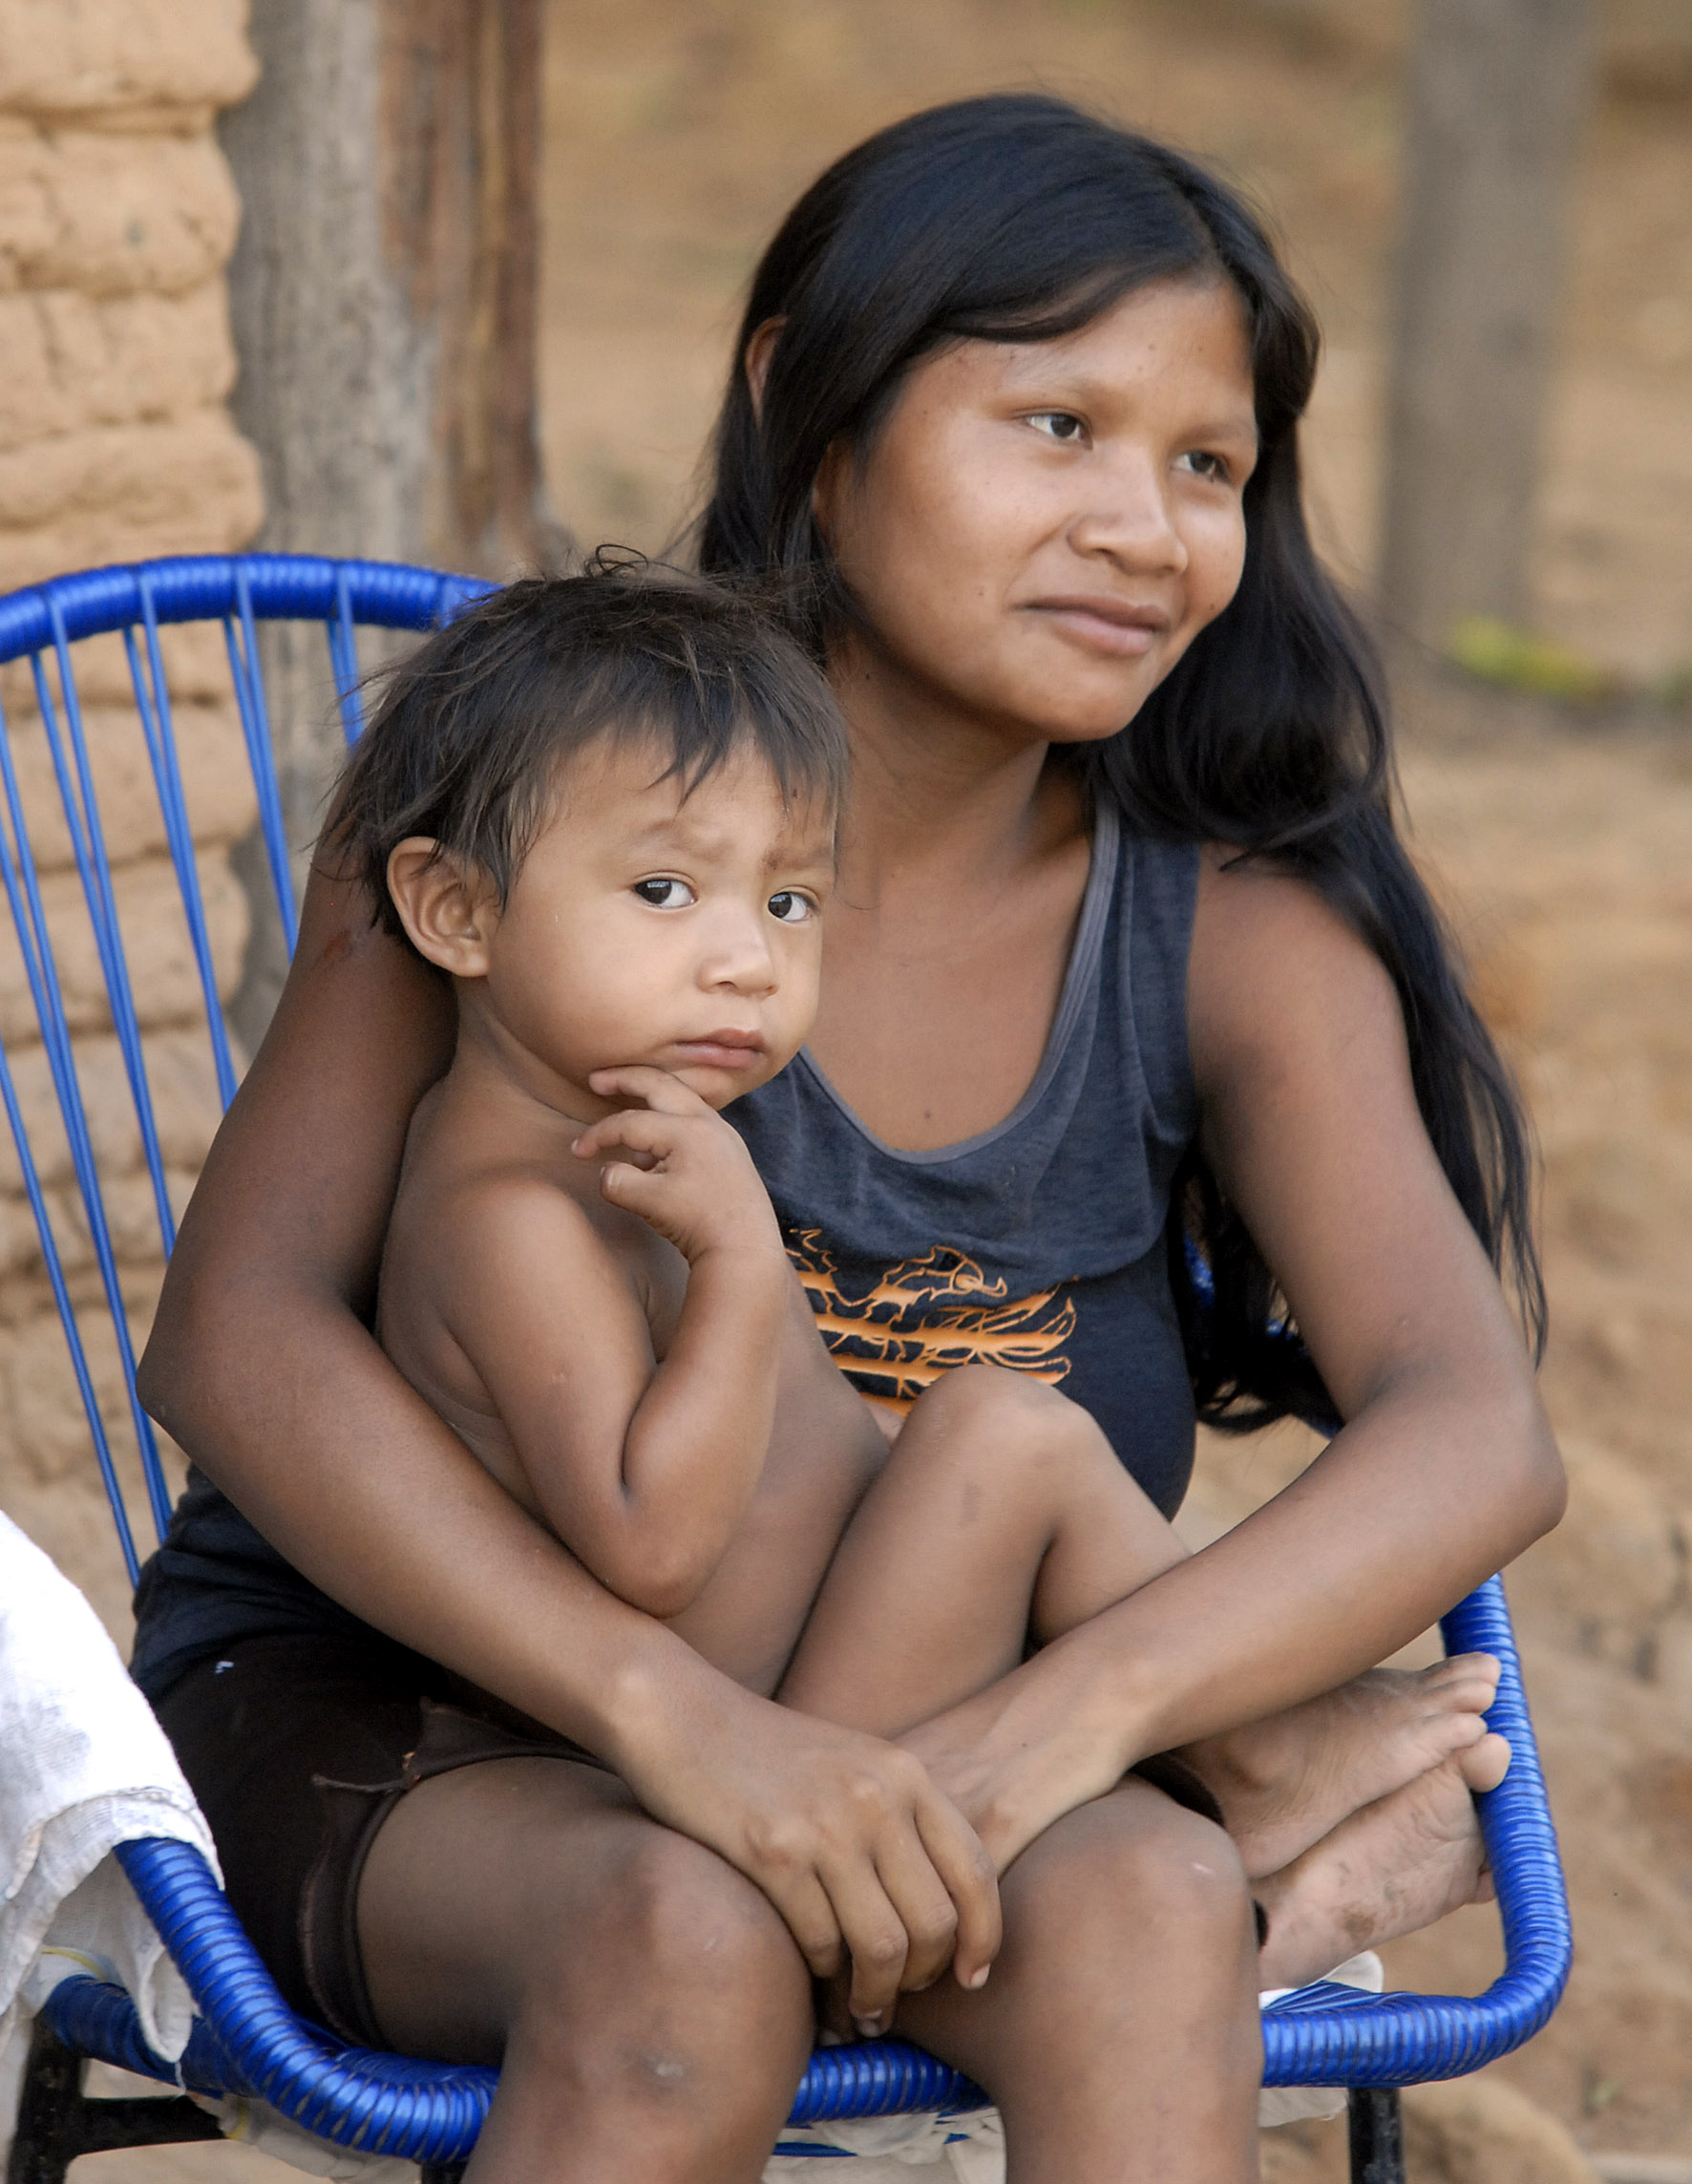 The Guajajara are an indigenous people in the Brazilian state of Maranhão. They are one of the most numerous indigenous groups in Brazil, with an estimated 13,100 individuals living on indigenous land.